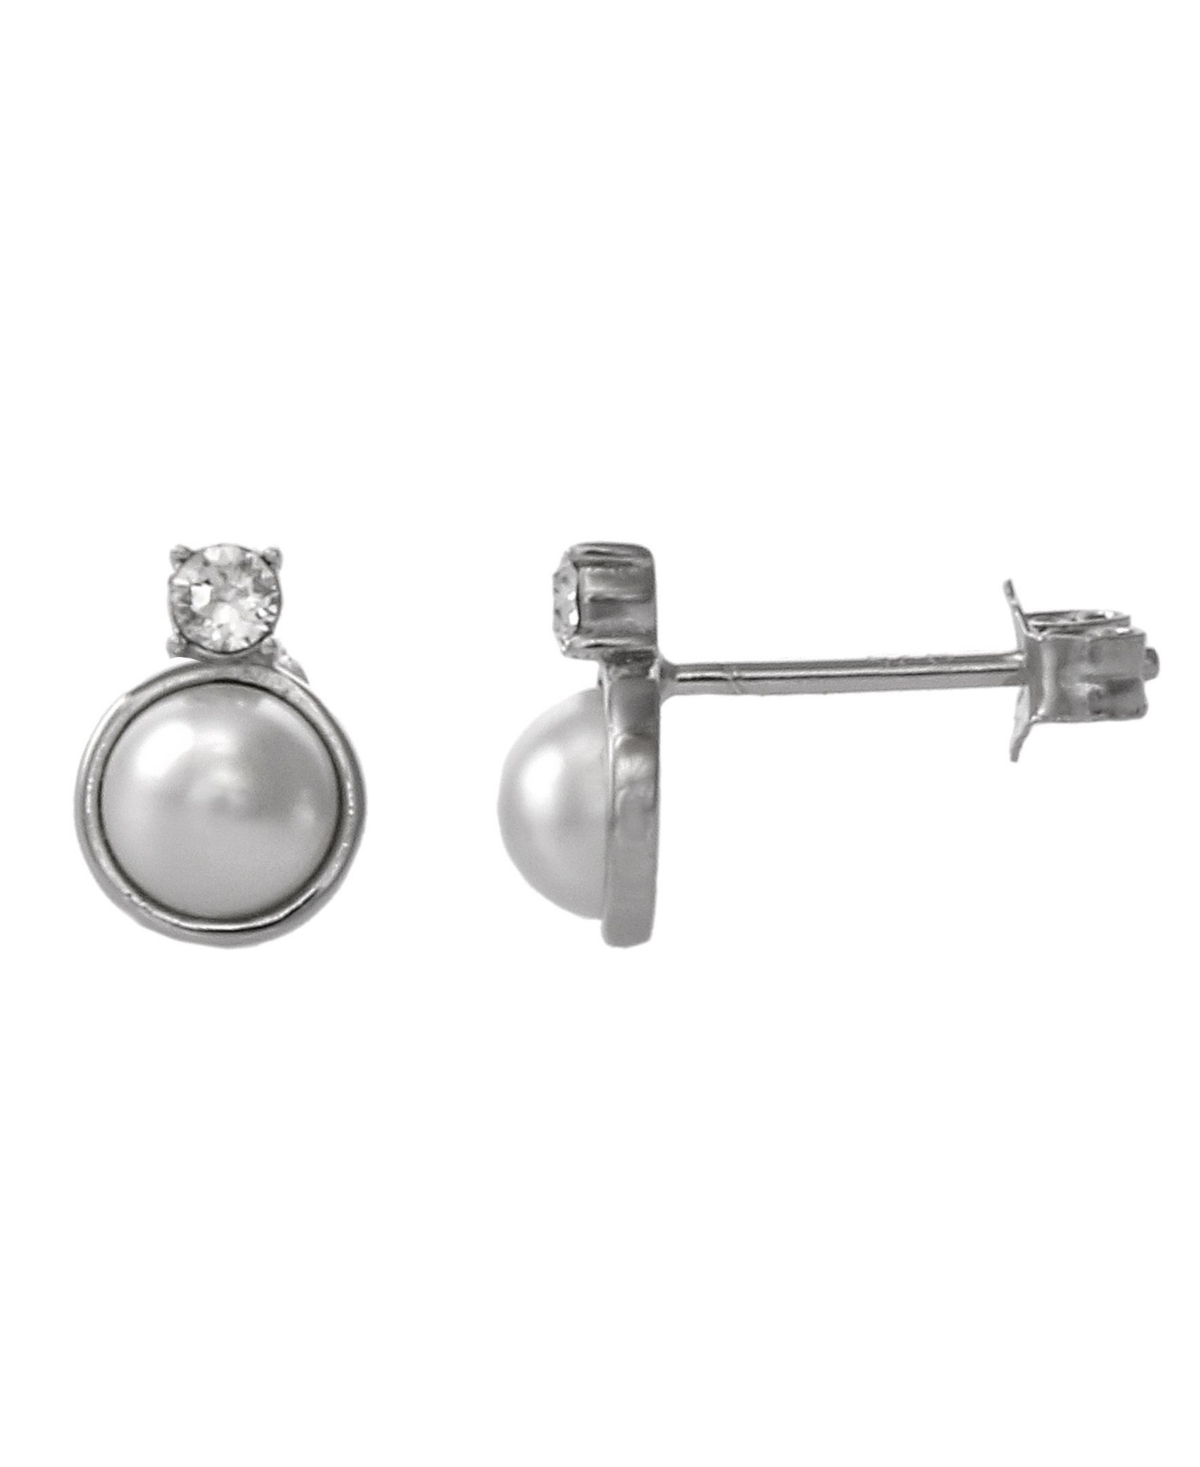 Fao Schwarz Women's Sterling Silver Stud Earrings with Imitation Pearl and Crystal Stone